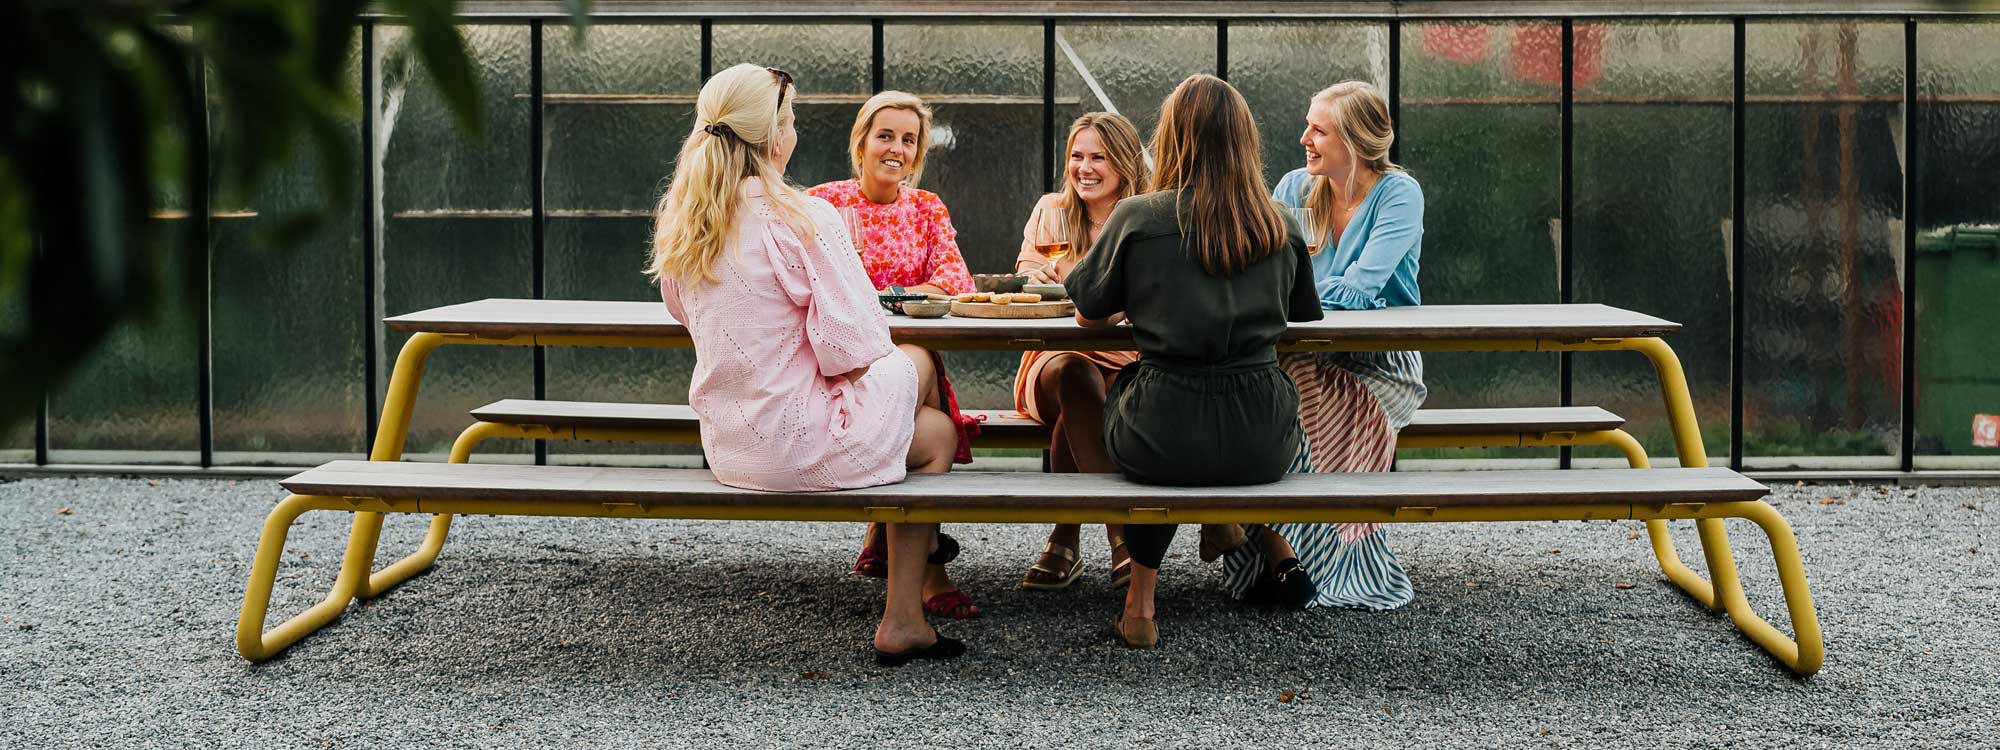 Image of 5 women sat enjoying each other's company on Wünder's The Table modern picnic table and benches